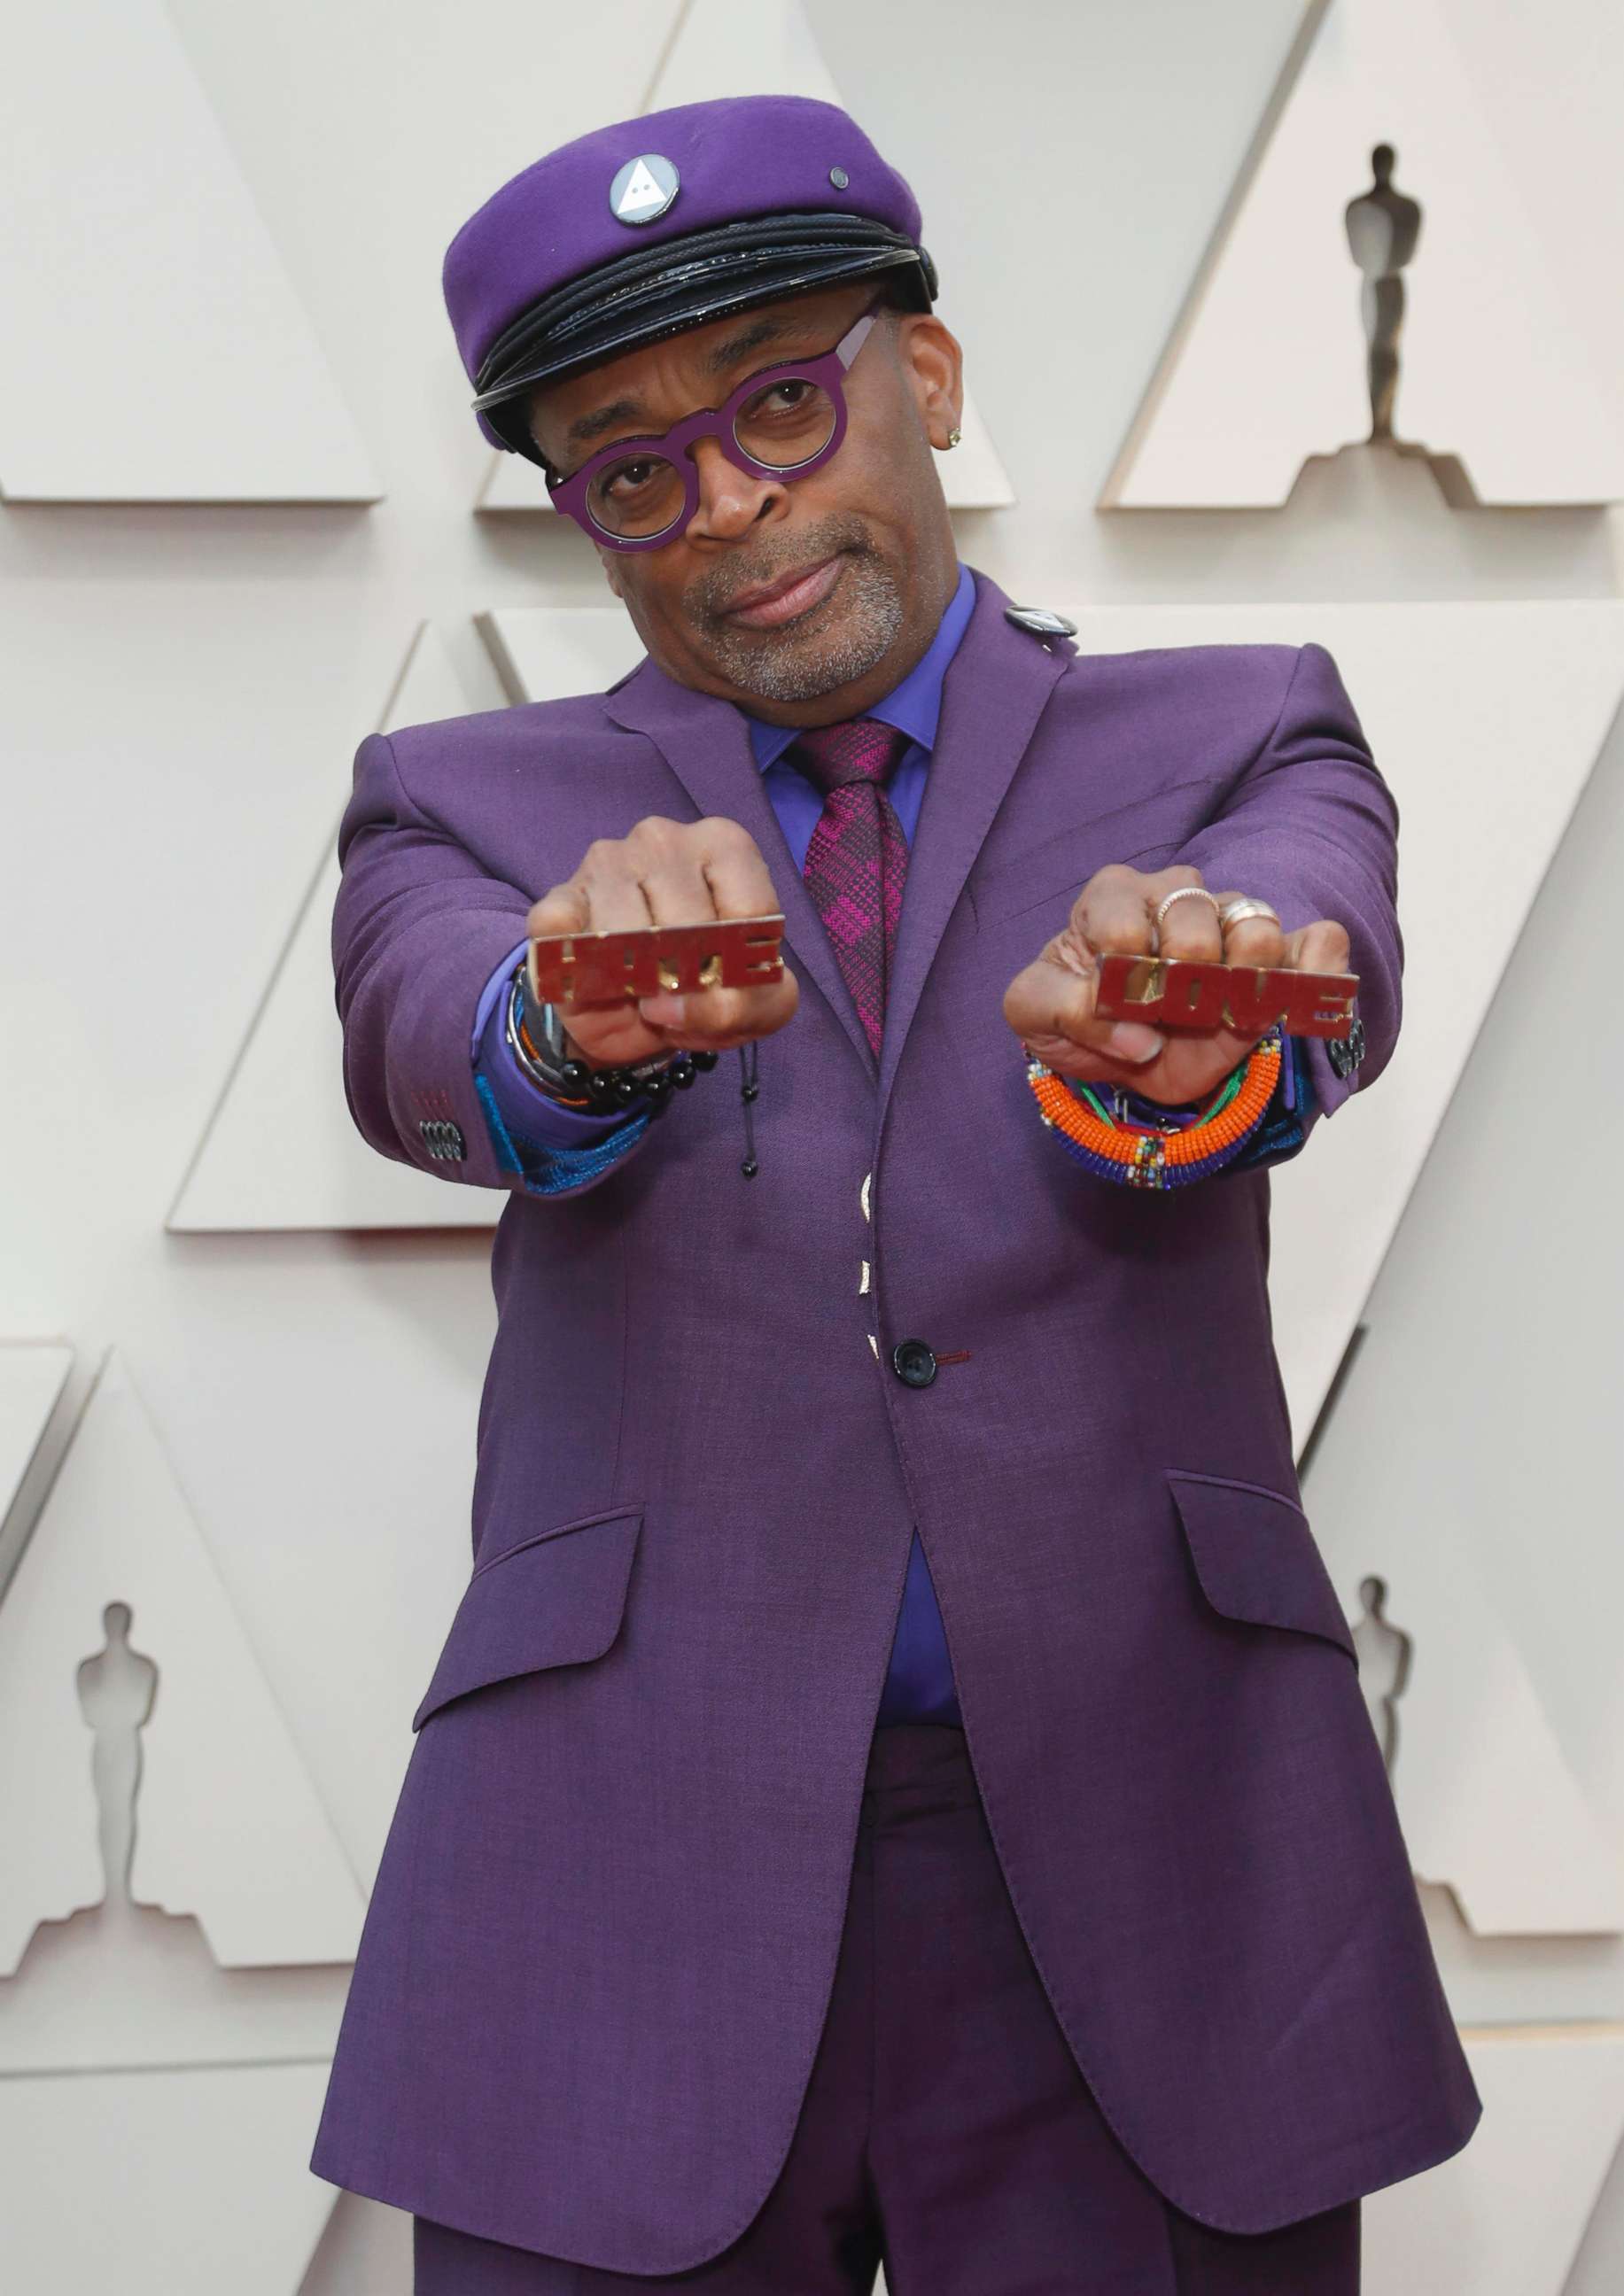 PHOTO: Director Spike Lee holds knuckle rings reading "Hate" and "Love" on the red carpet at the Oscars in Hollywood, Calif., Feb. 24, 2019.